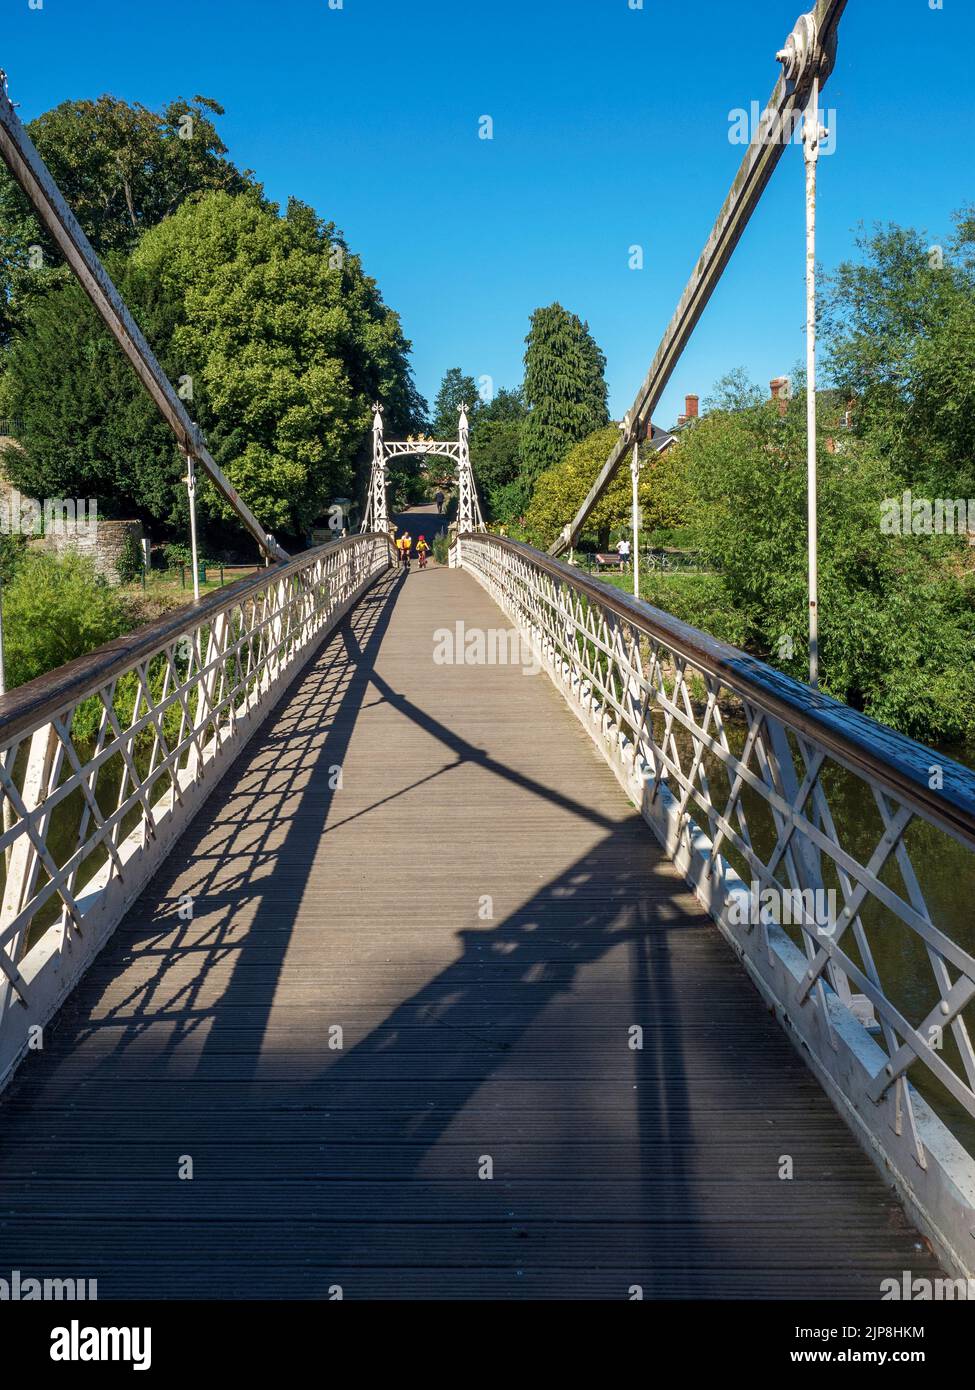 Victoria footbridge over the River Wye erected 1897 for the diamond jubilee of Queen Victoria Hereford Herefordshire England Stock Photo